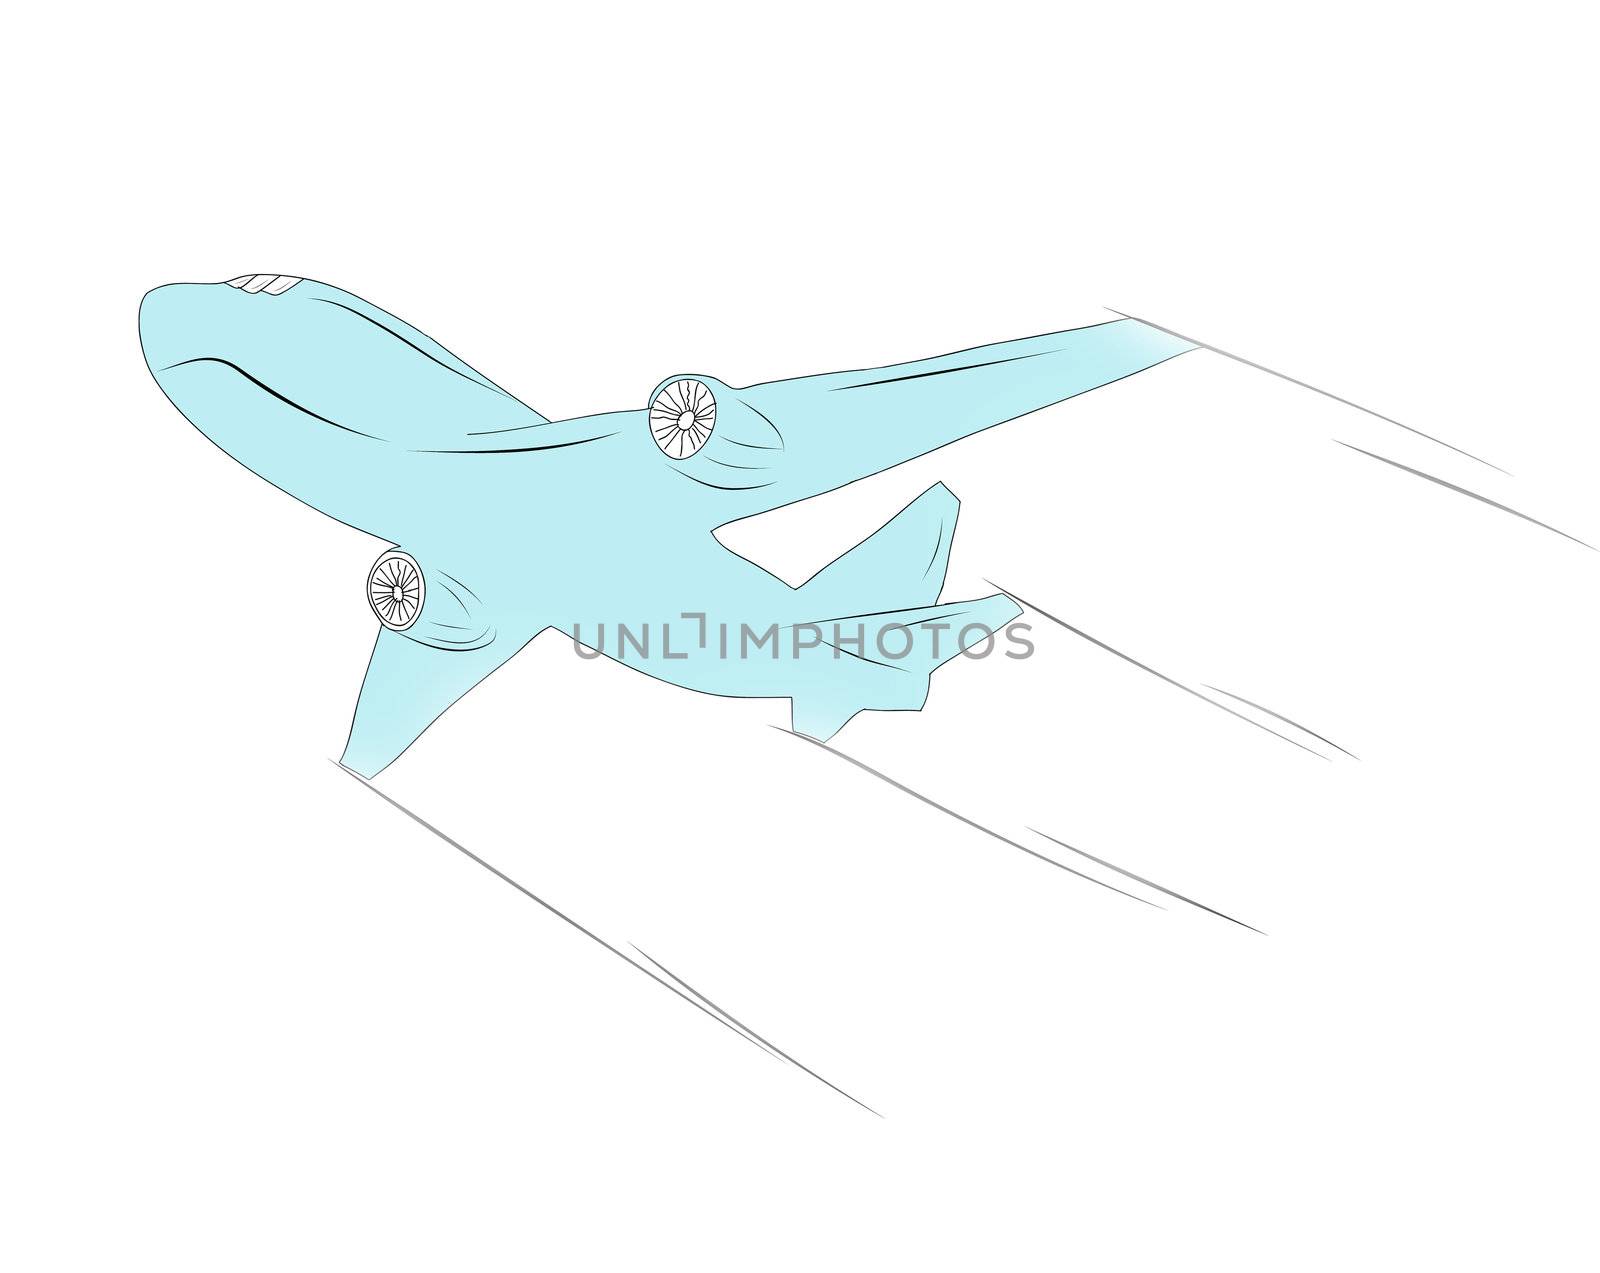 Blue airplane across the world by rufous